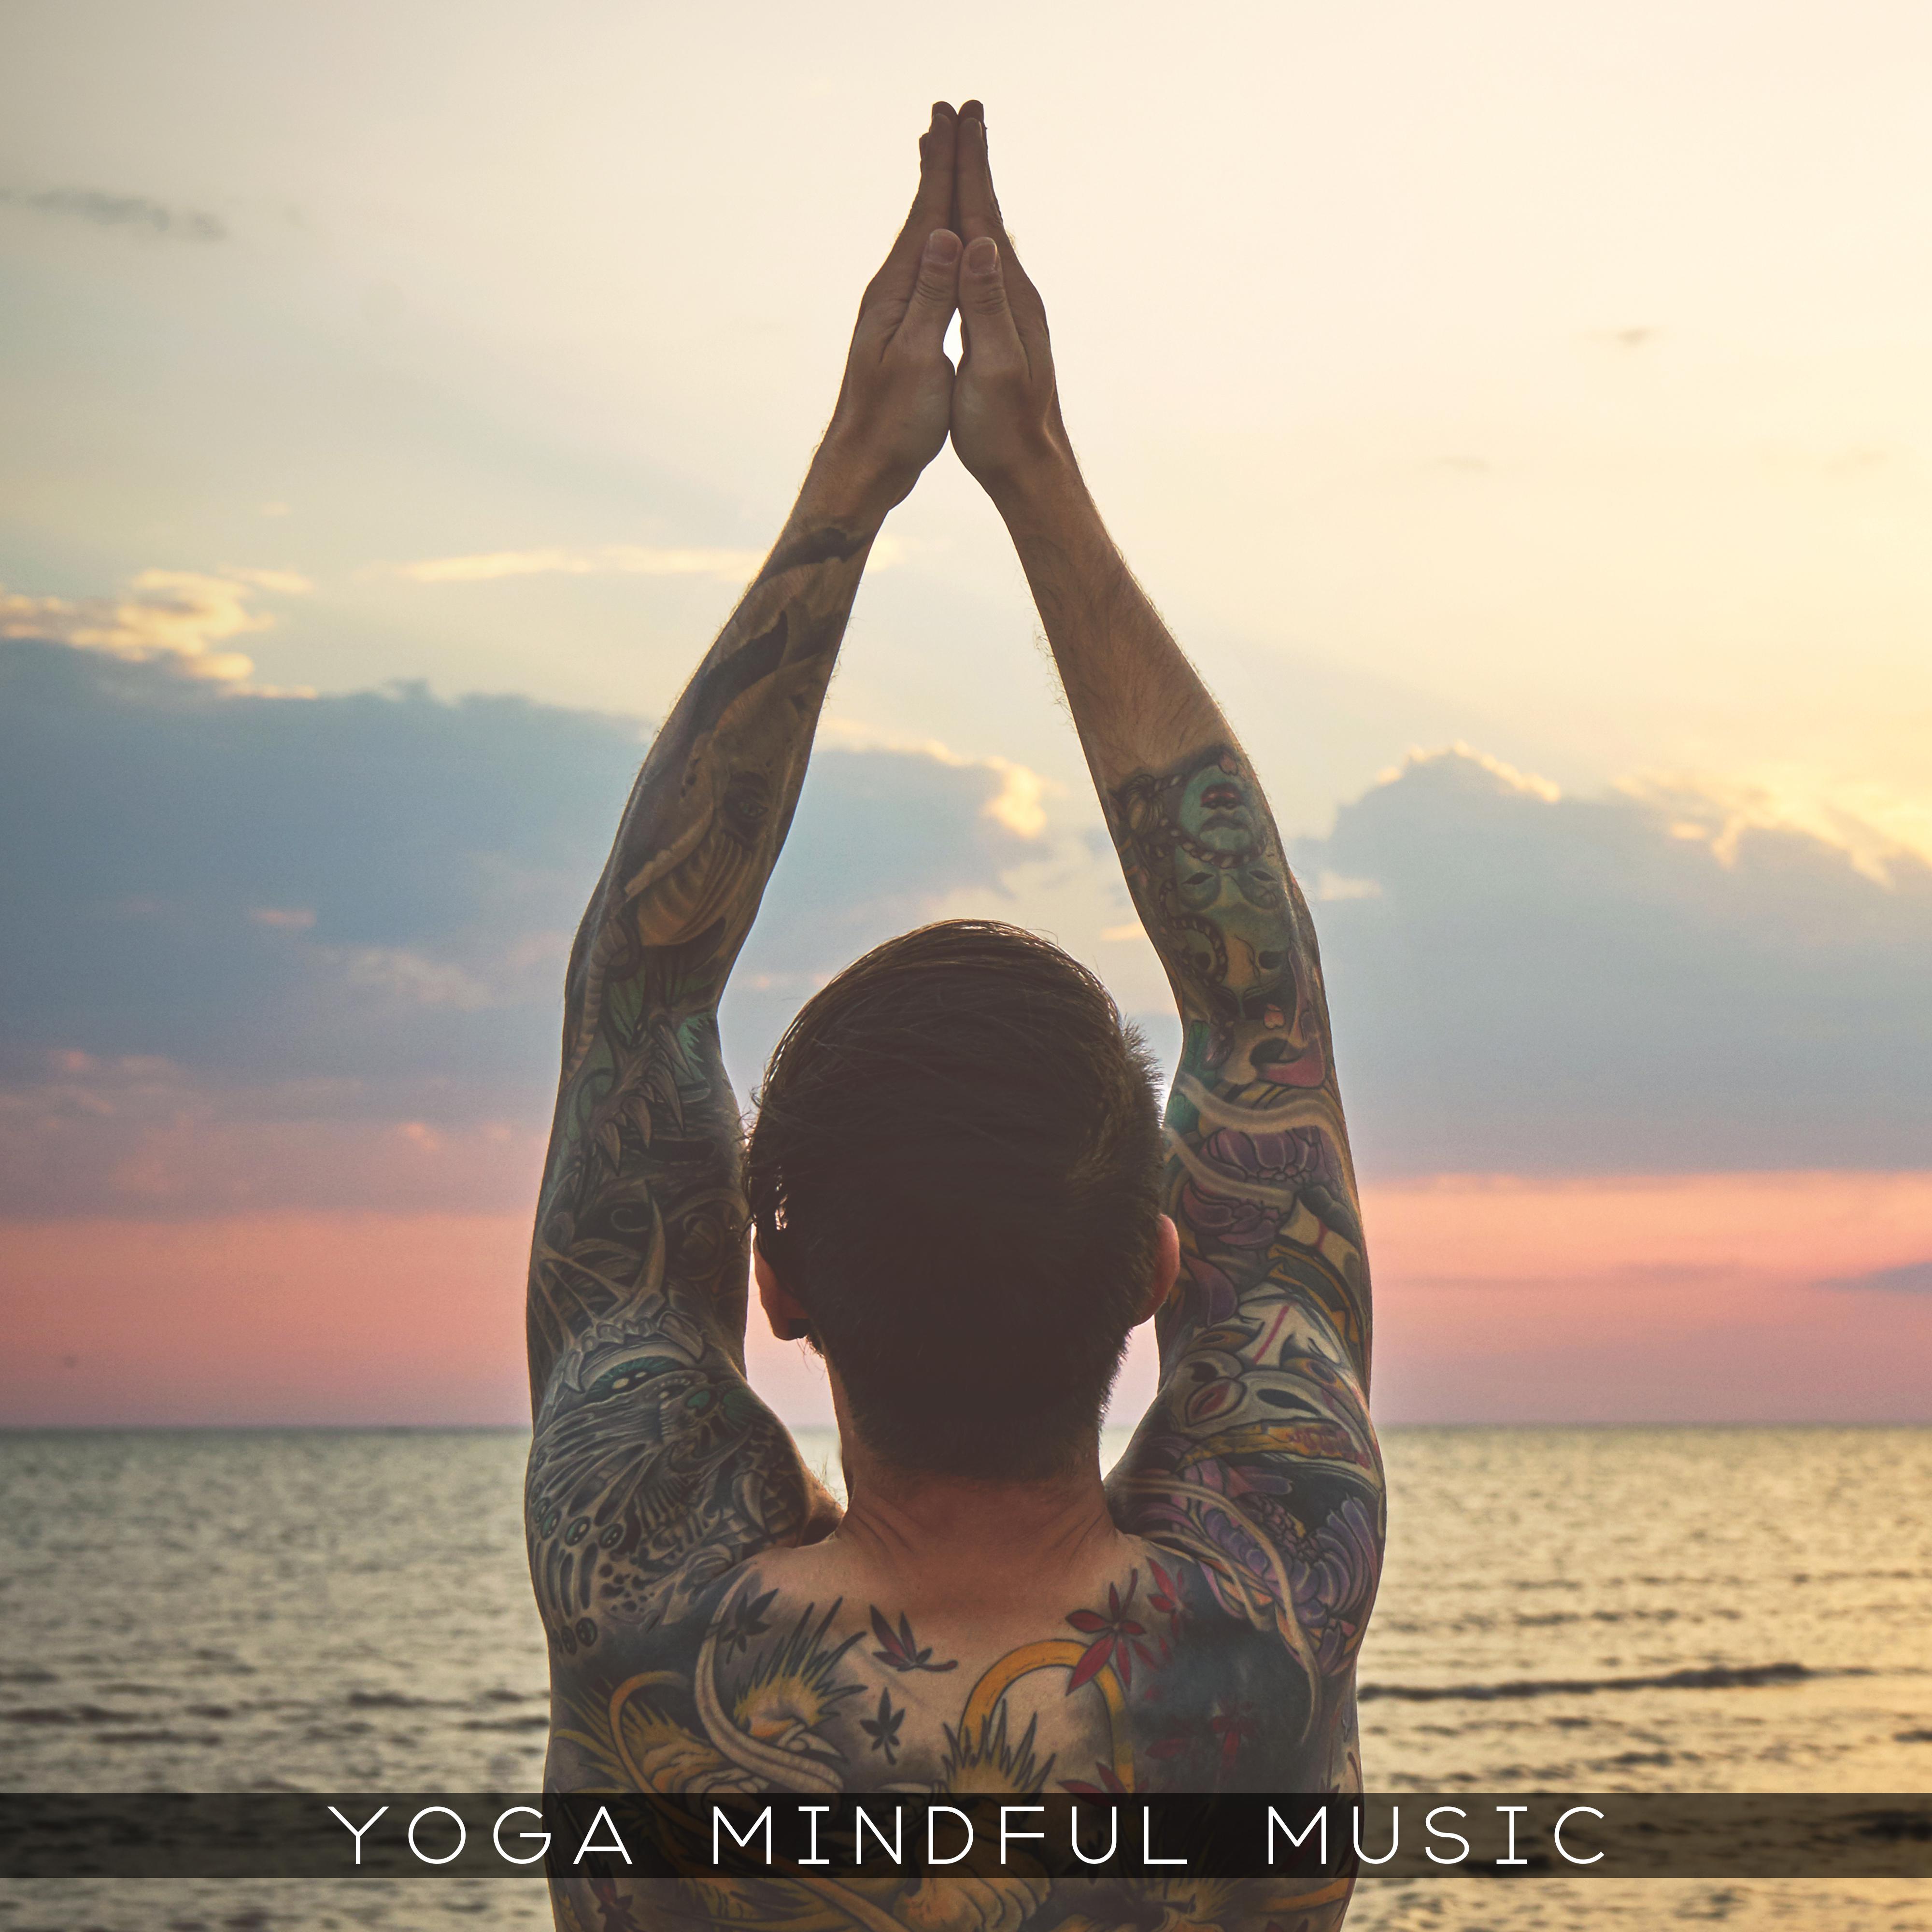 Yoga Mindful Music: Spiritual Awakening, Deep Harmony, 15 Relaxing Sounds for Rest, Deep Meditation, Full Concentration, Mindfulness Guide